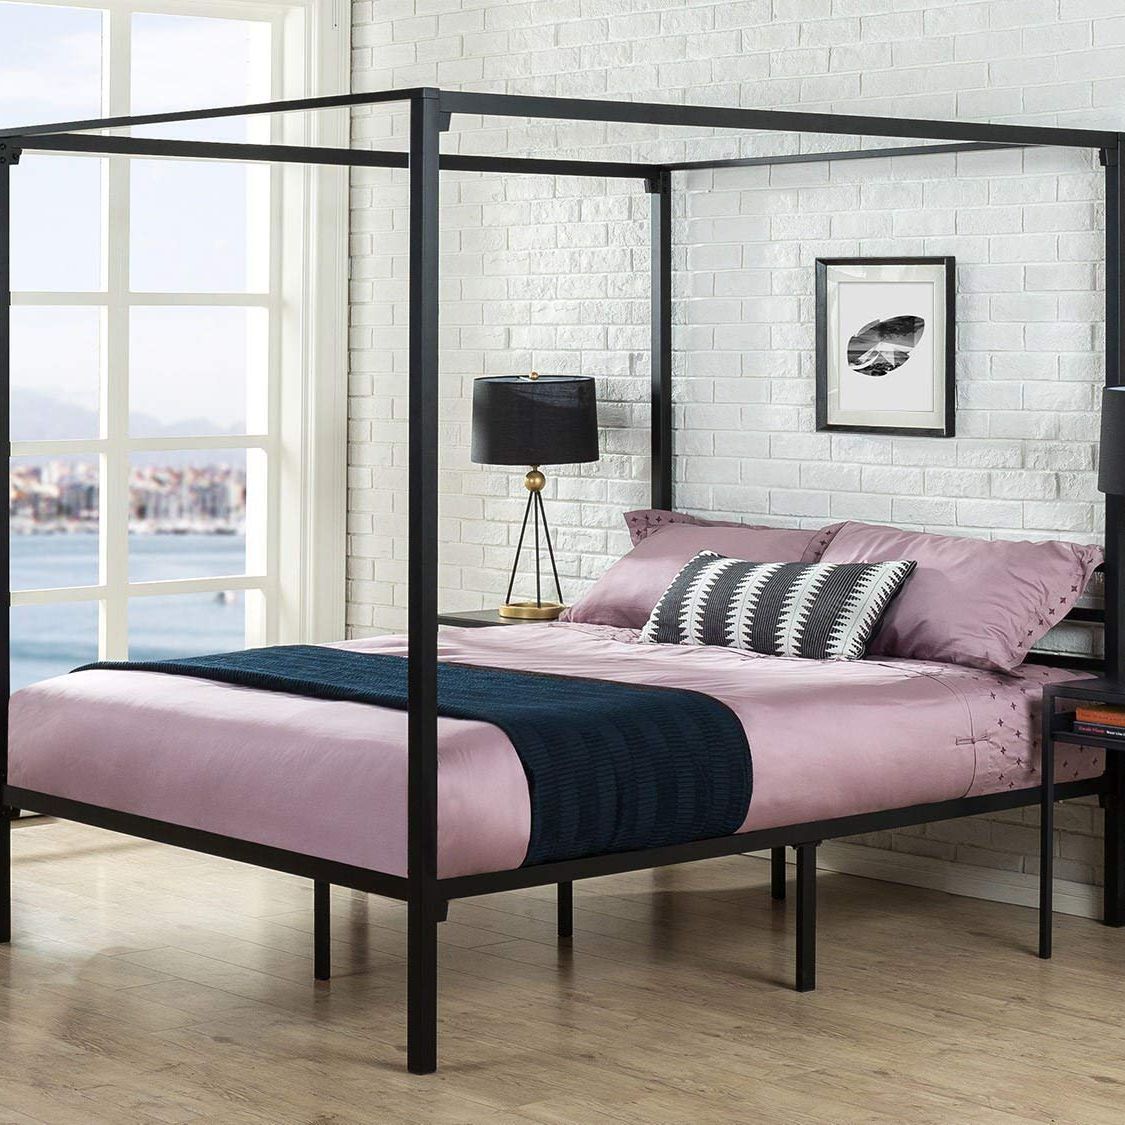 19 Best Metal Bed Frames 2020 The, What Kind Of Metal Are Bed Frames Made Of